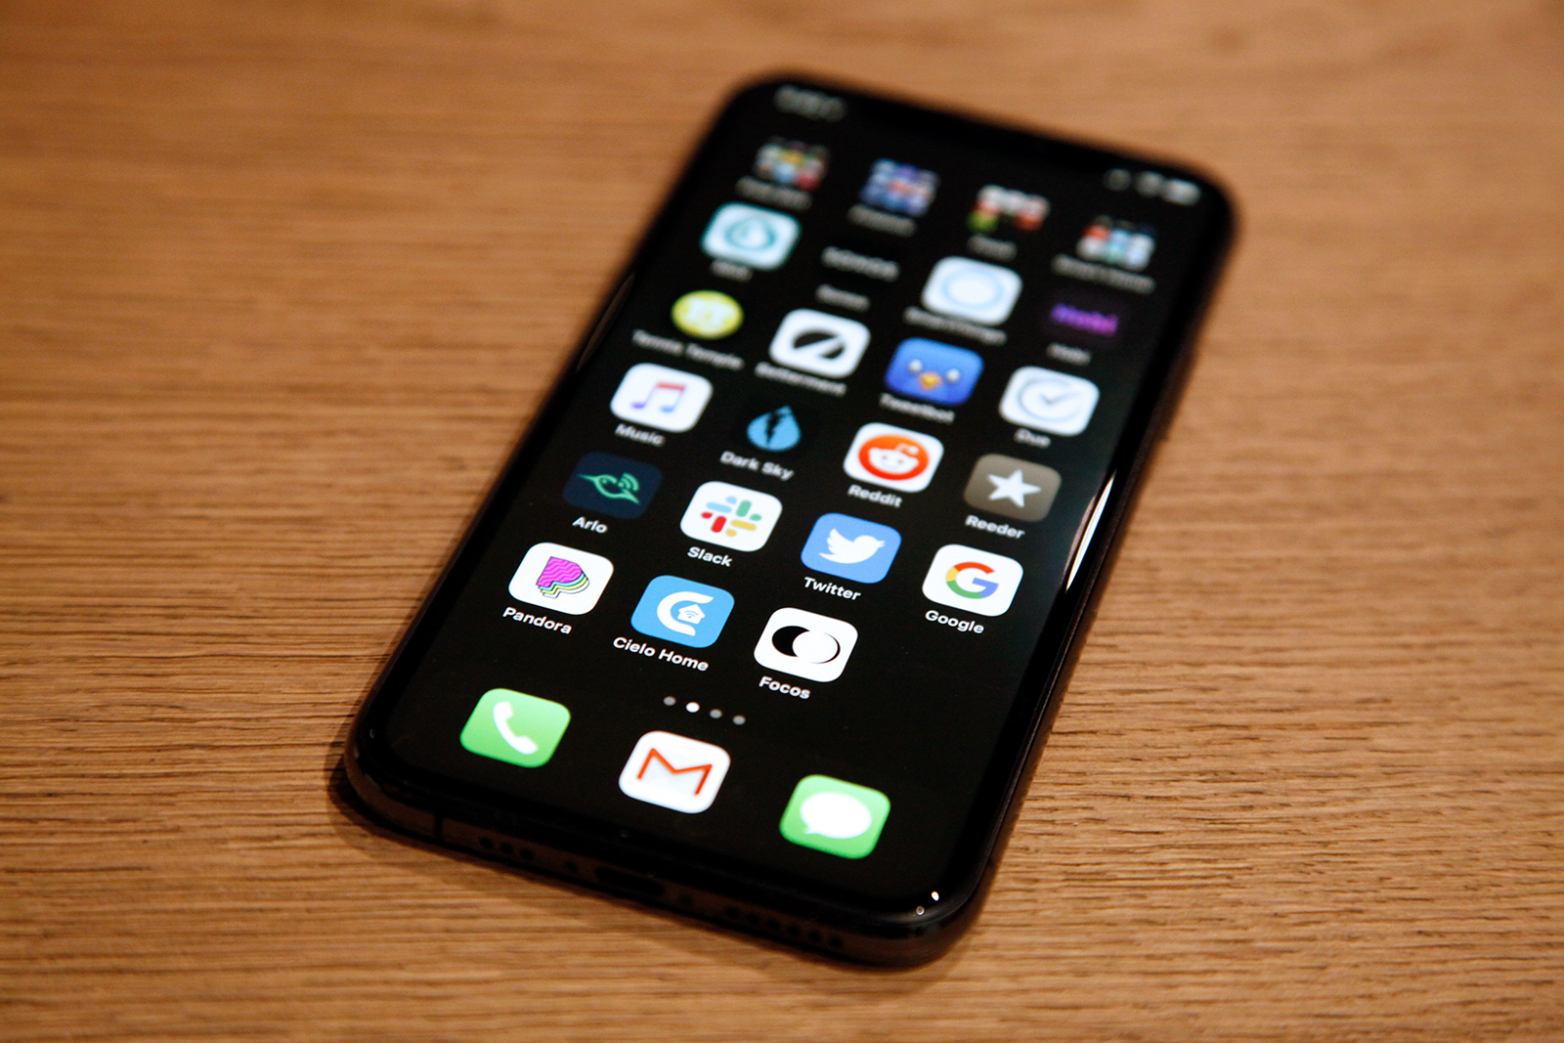 Forget Black Friday: iPhone 11 And 11 Pro Are on Sale Right Now – Here Are 3 Great Deals